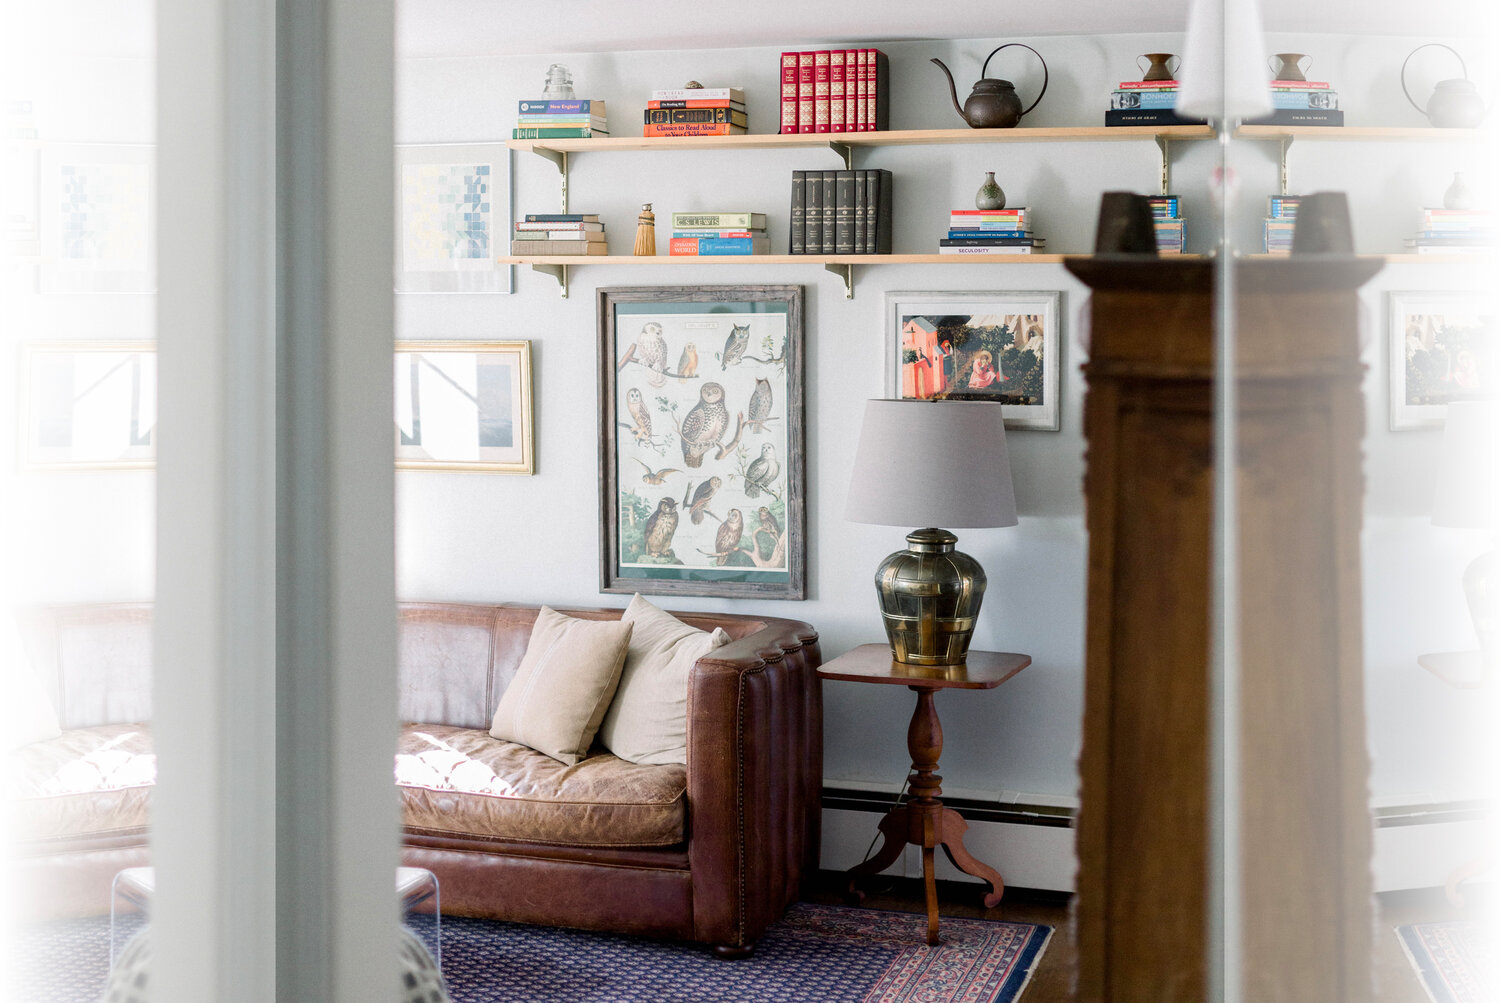 Neutral walls allow art and objects to stand out